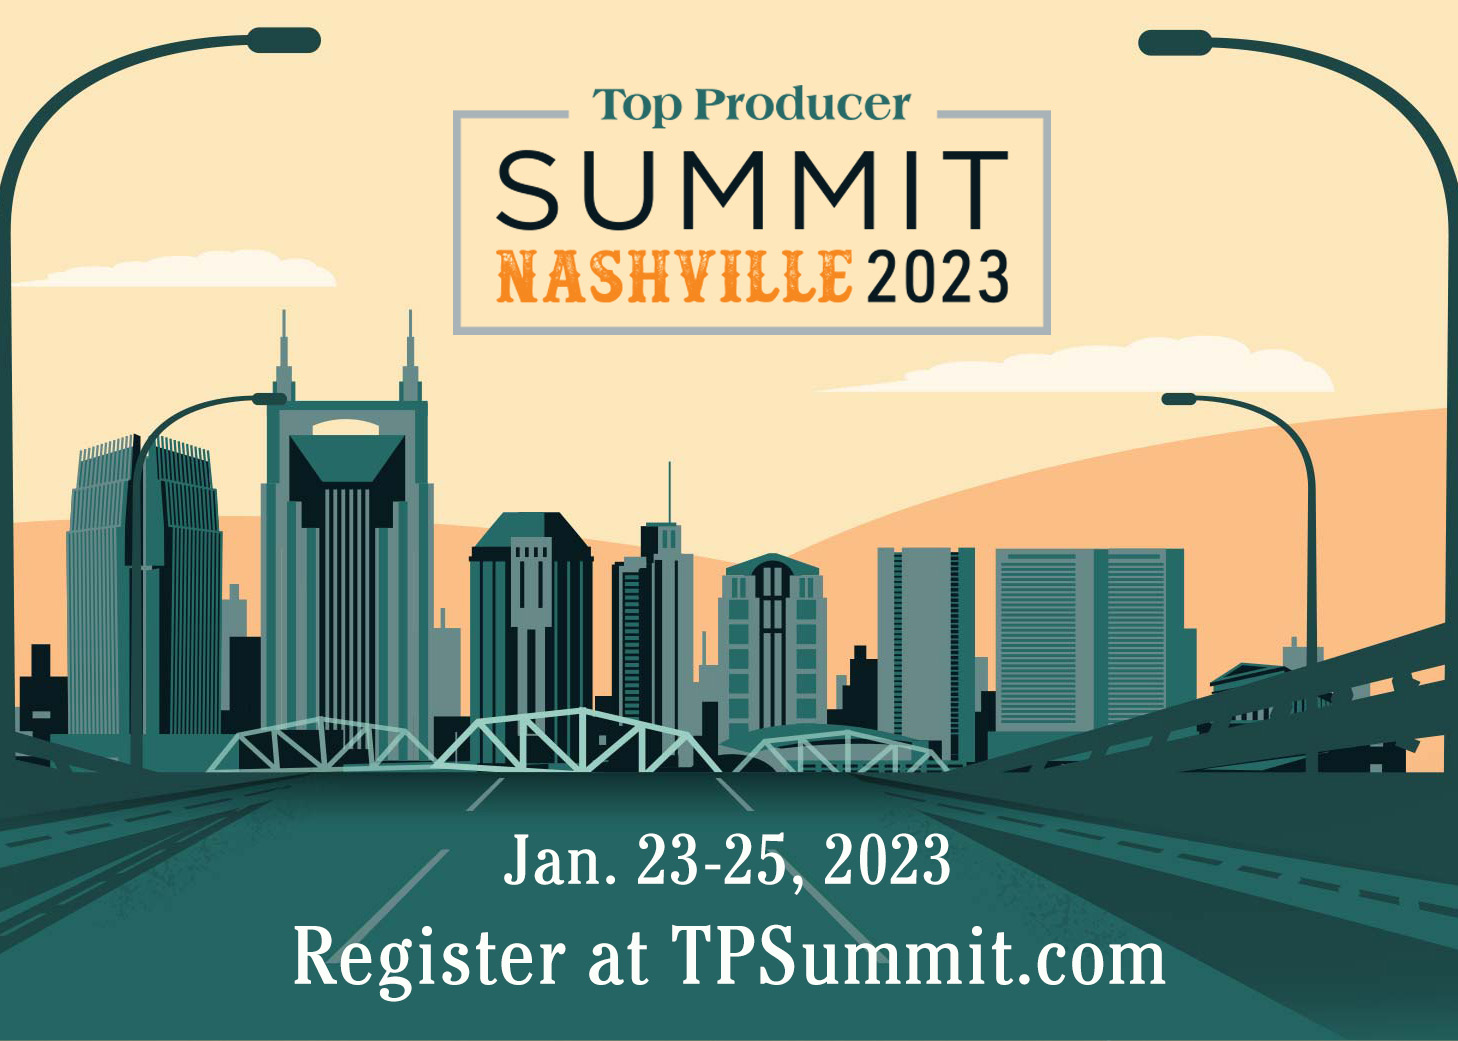 Top Producer Summit